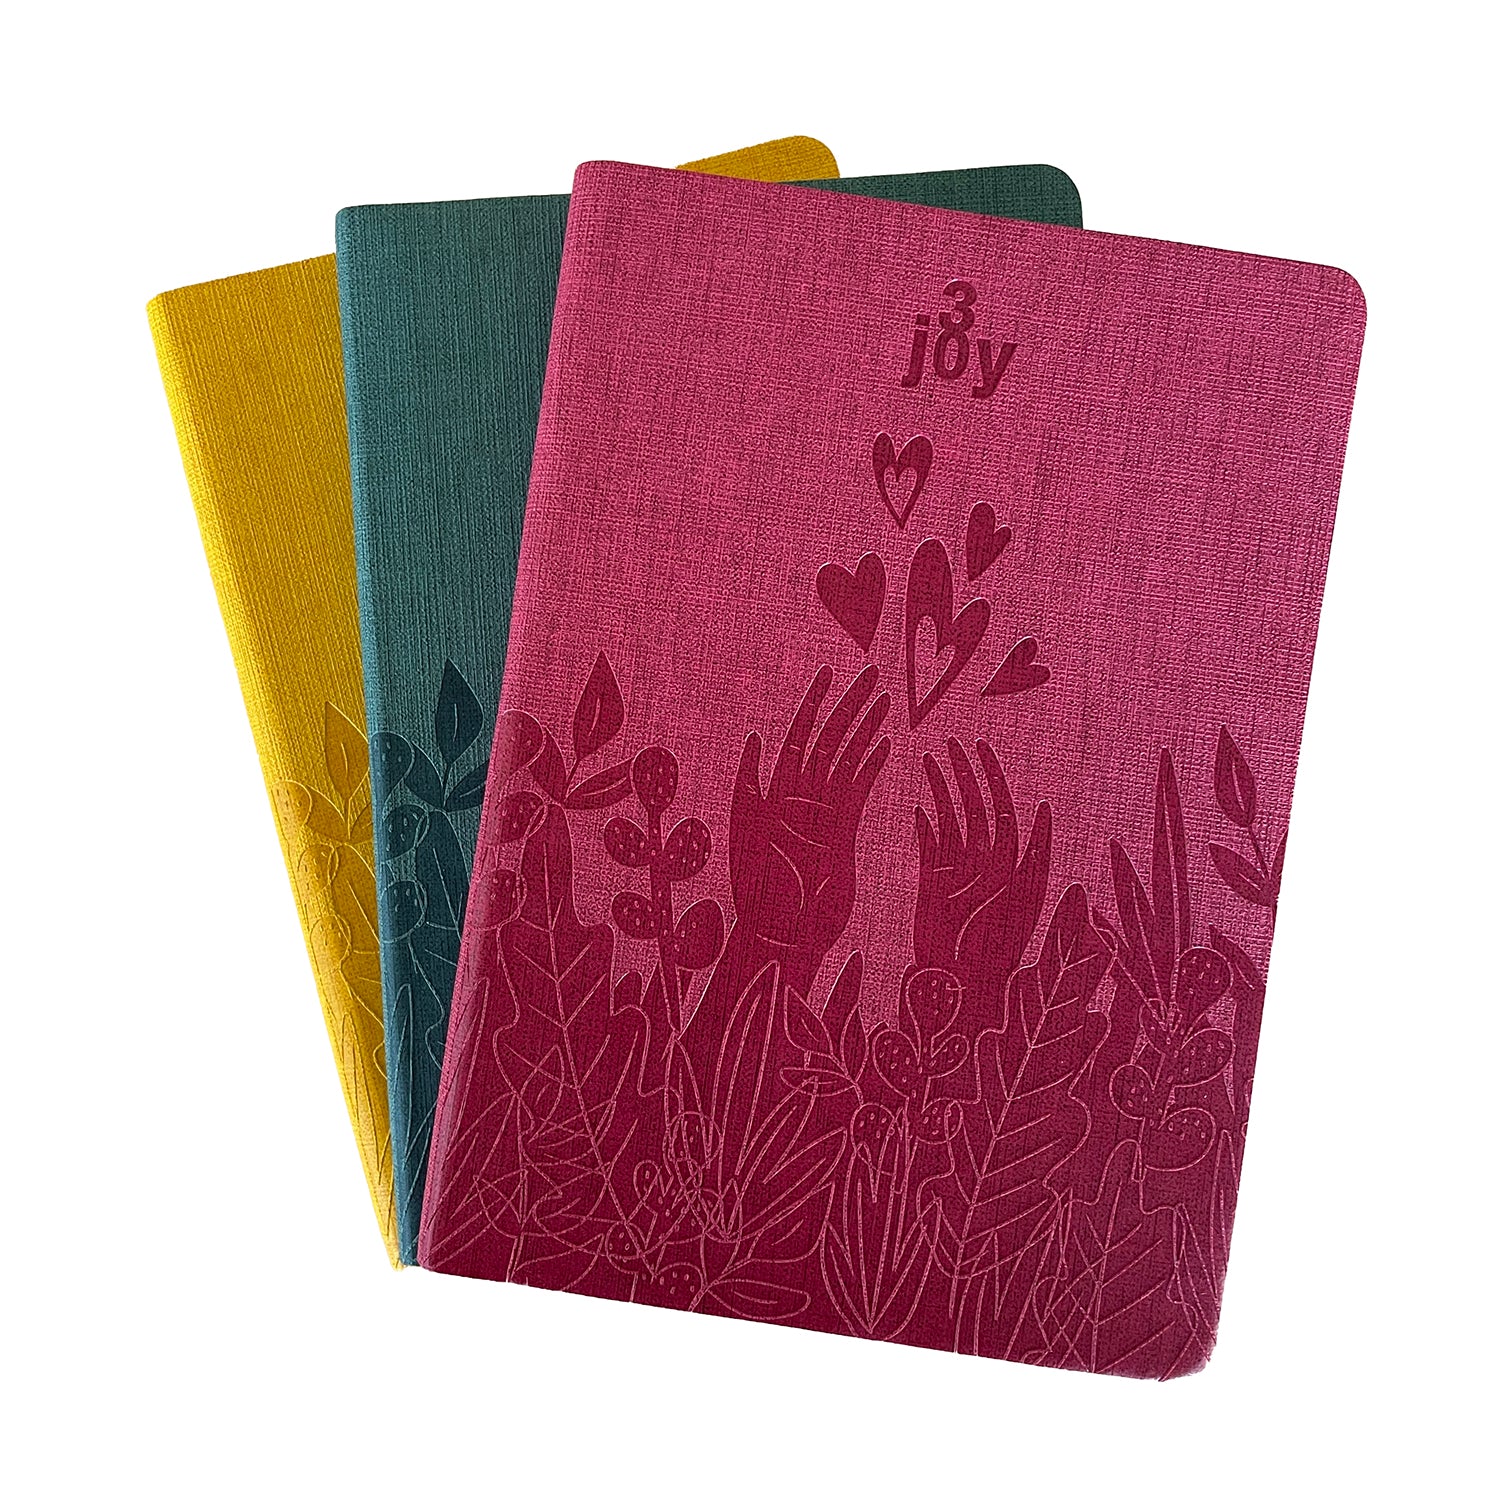 The Gratitude Journal (special edition, print + digital) – Mindful Store